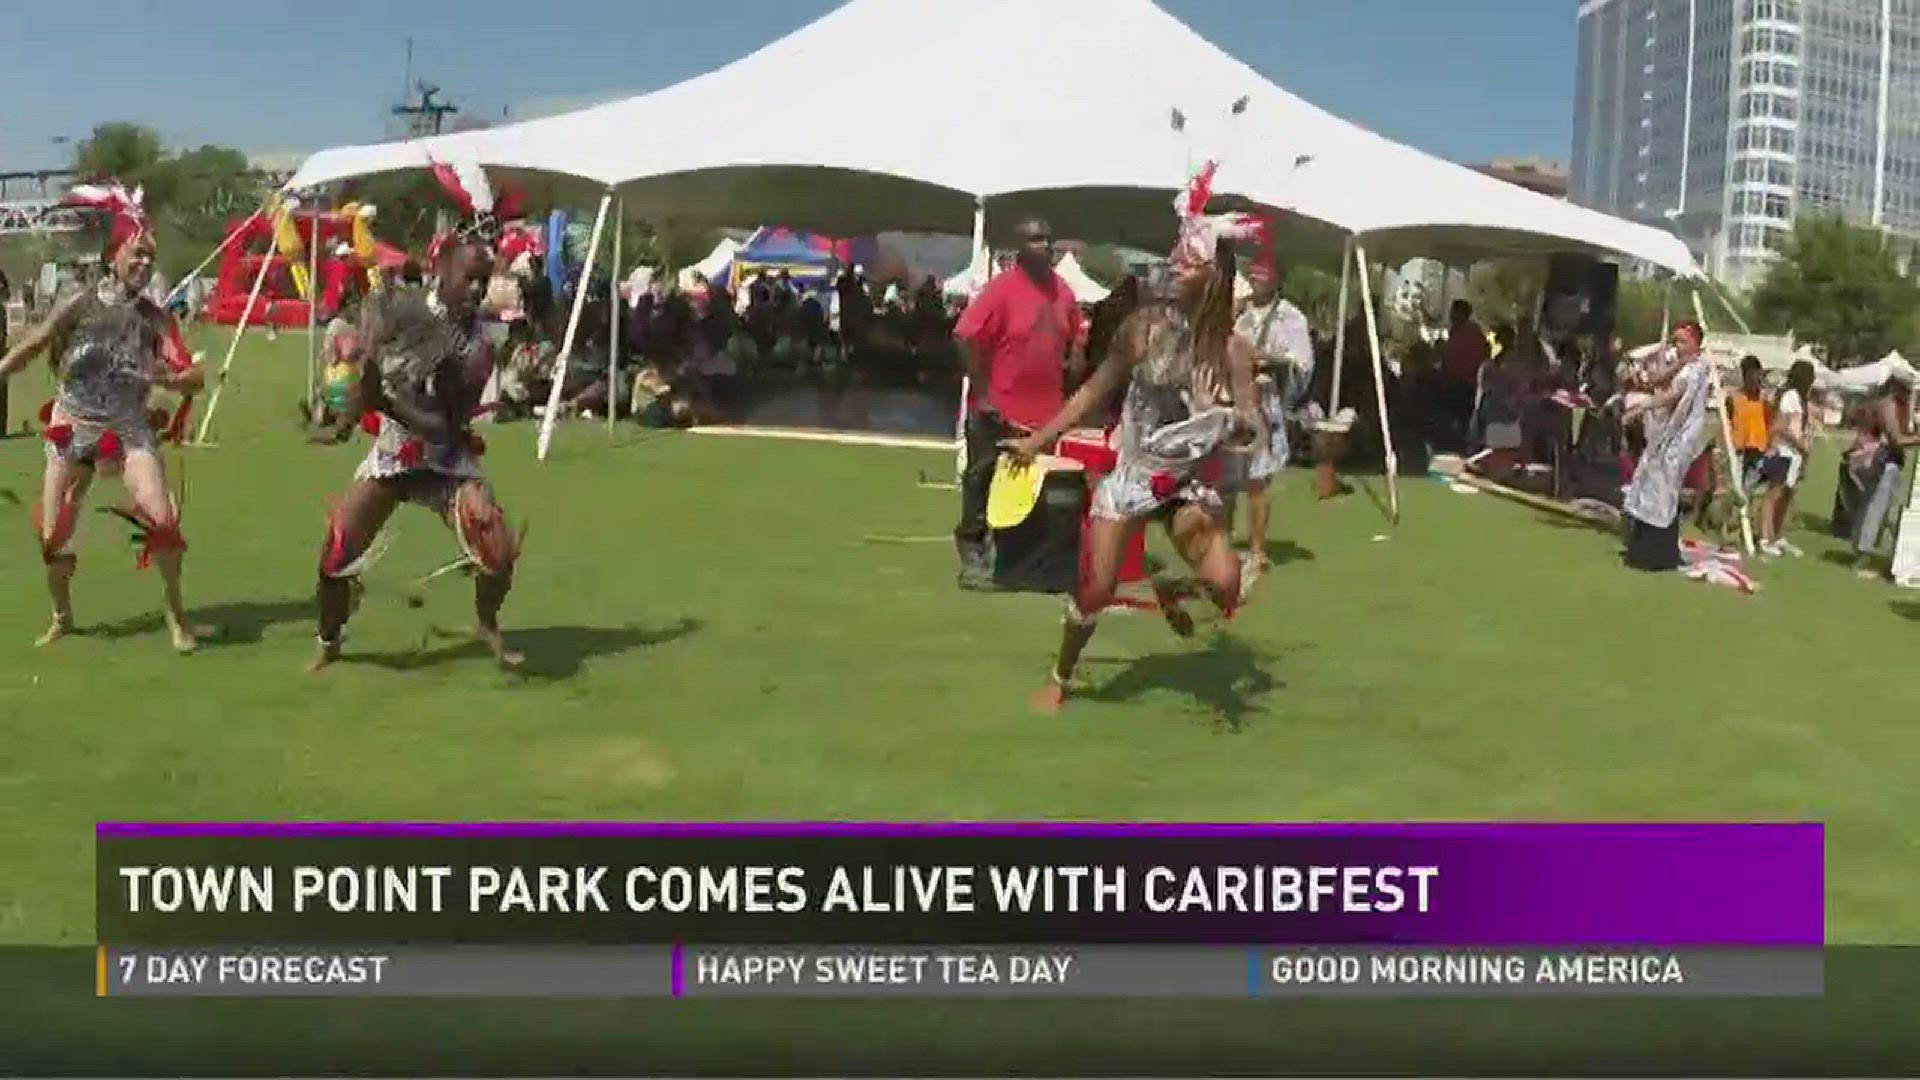 Caribfest comes to Town Point Park.